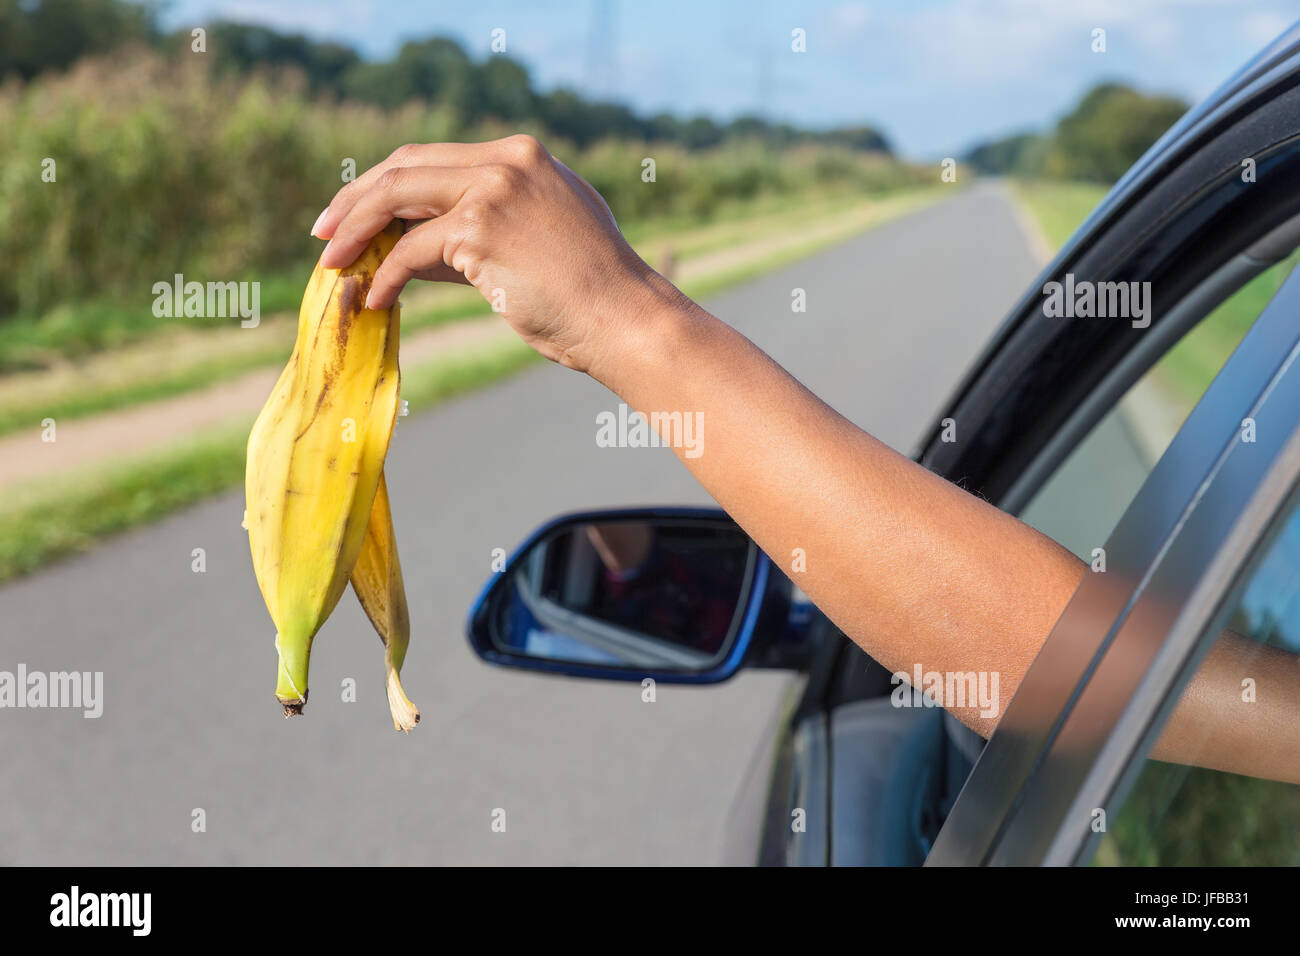 Arm dropping peel of banana out car window Stock Photo